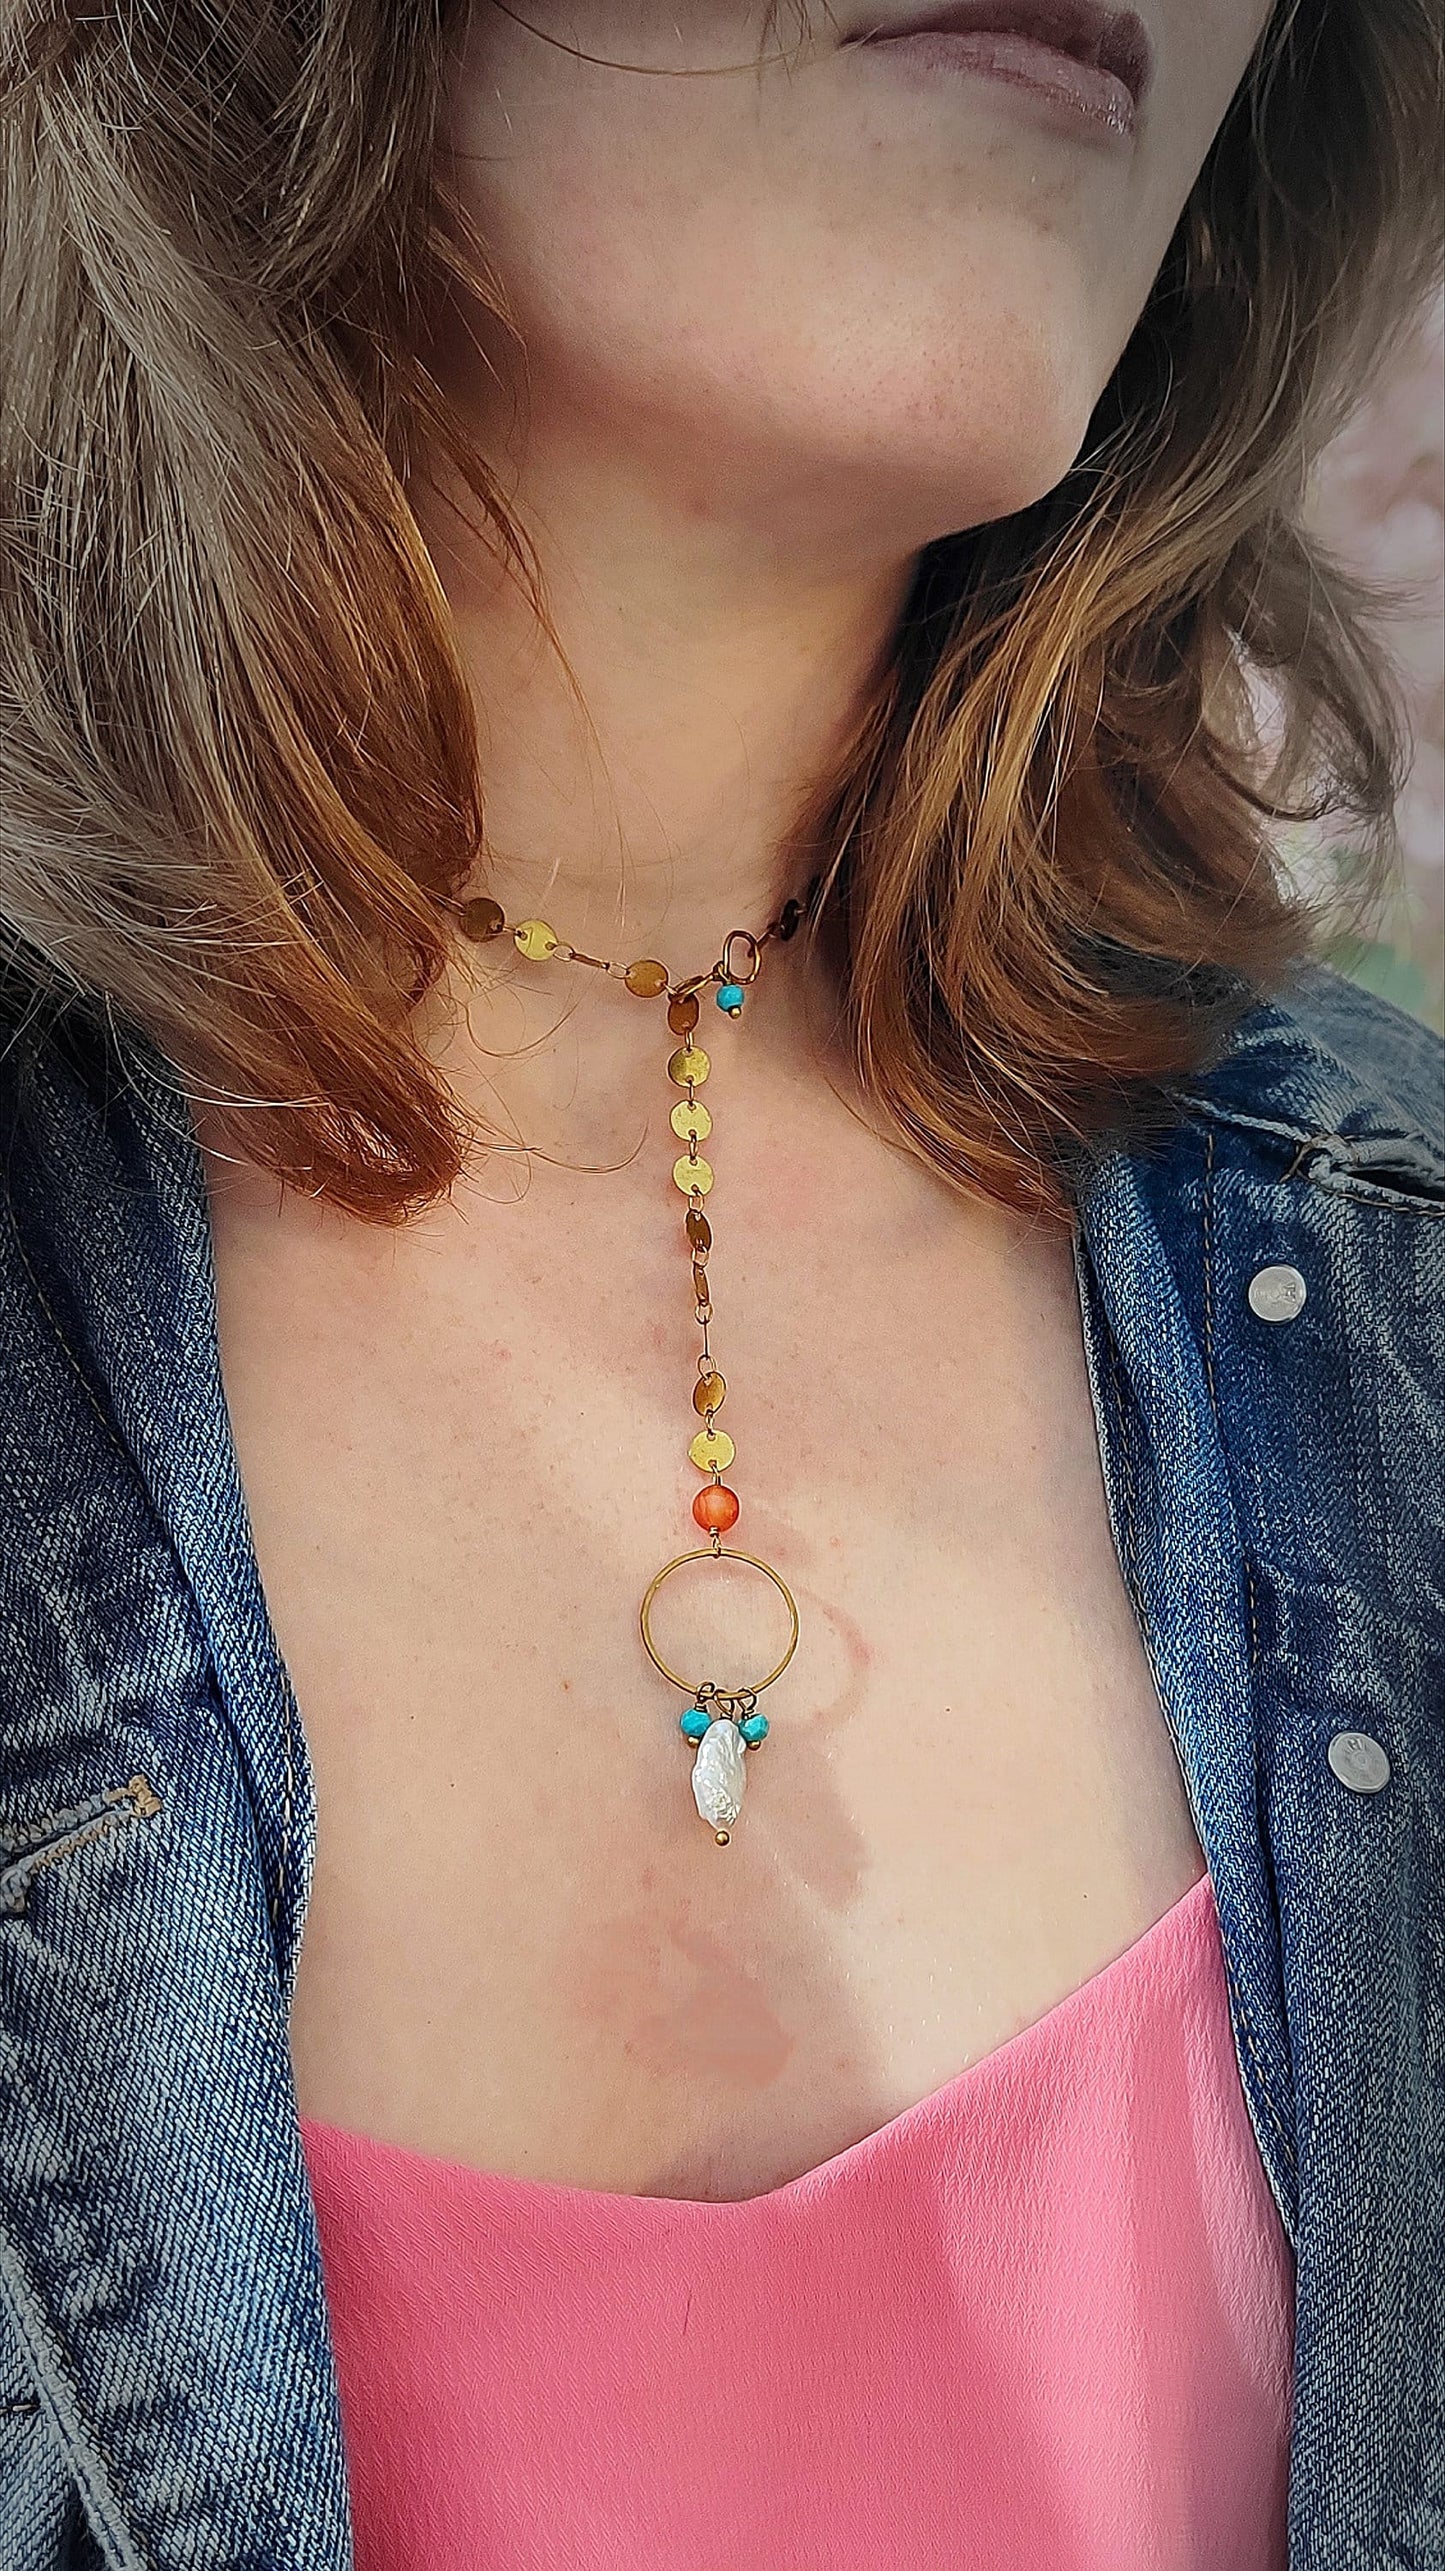 convertible keshi pearl necklace. baroque pearl y necklace. genuine turquoise y necklace. lariat necklace. intentional jewelry. carnelian necklace. bohemian jewelry. sustainable fashion.